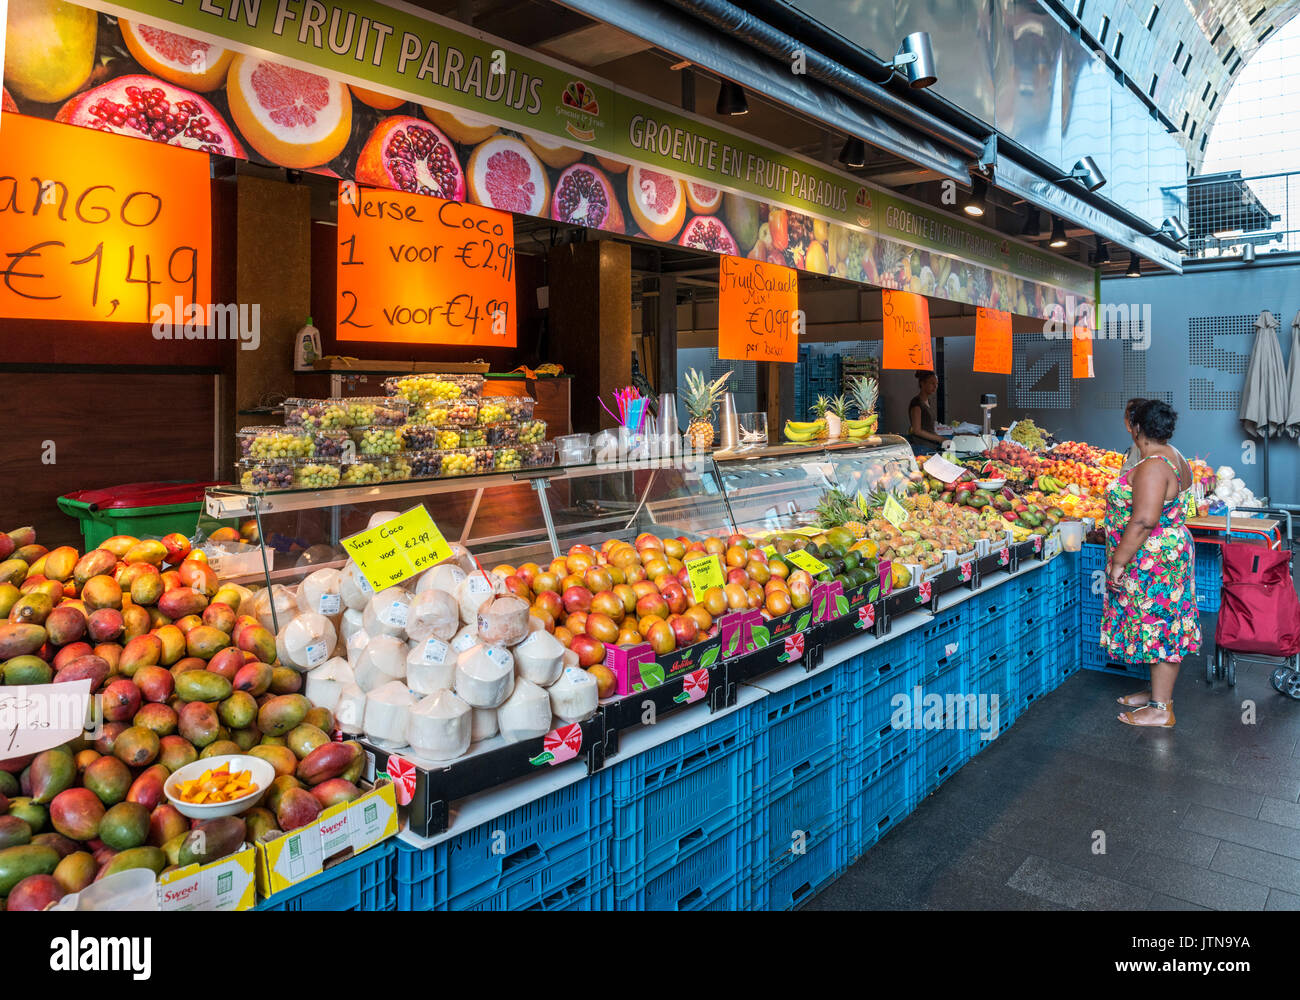 Fruit stall in the Markthal (Market Hall), Rotterdam, Netherlands Stock Photo